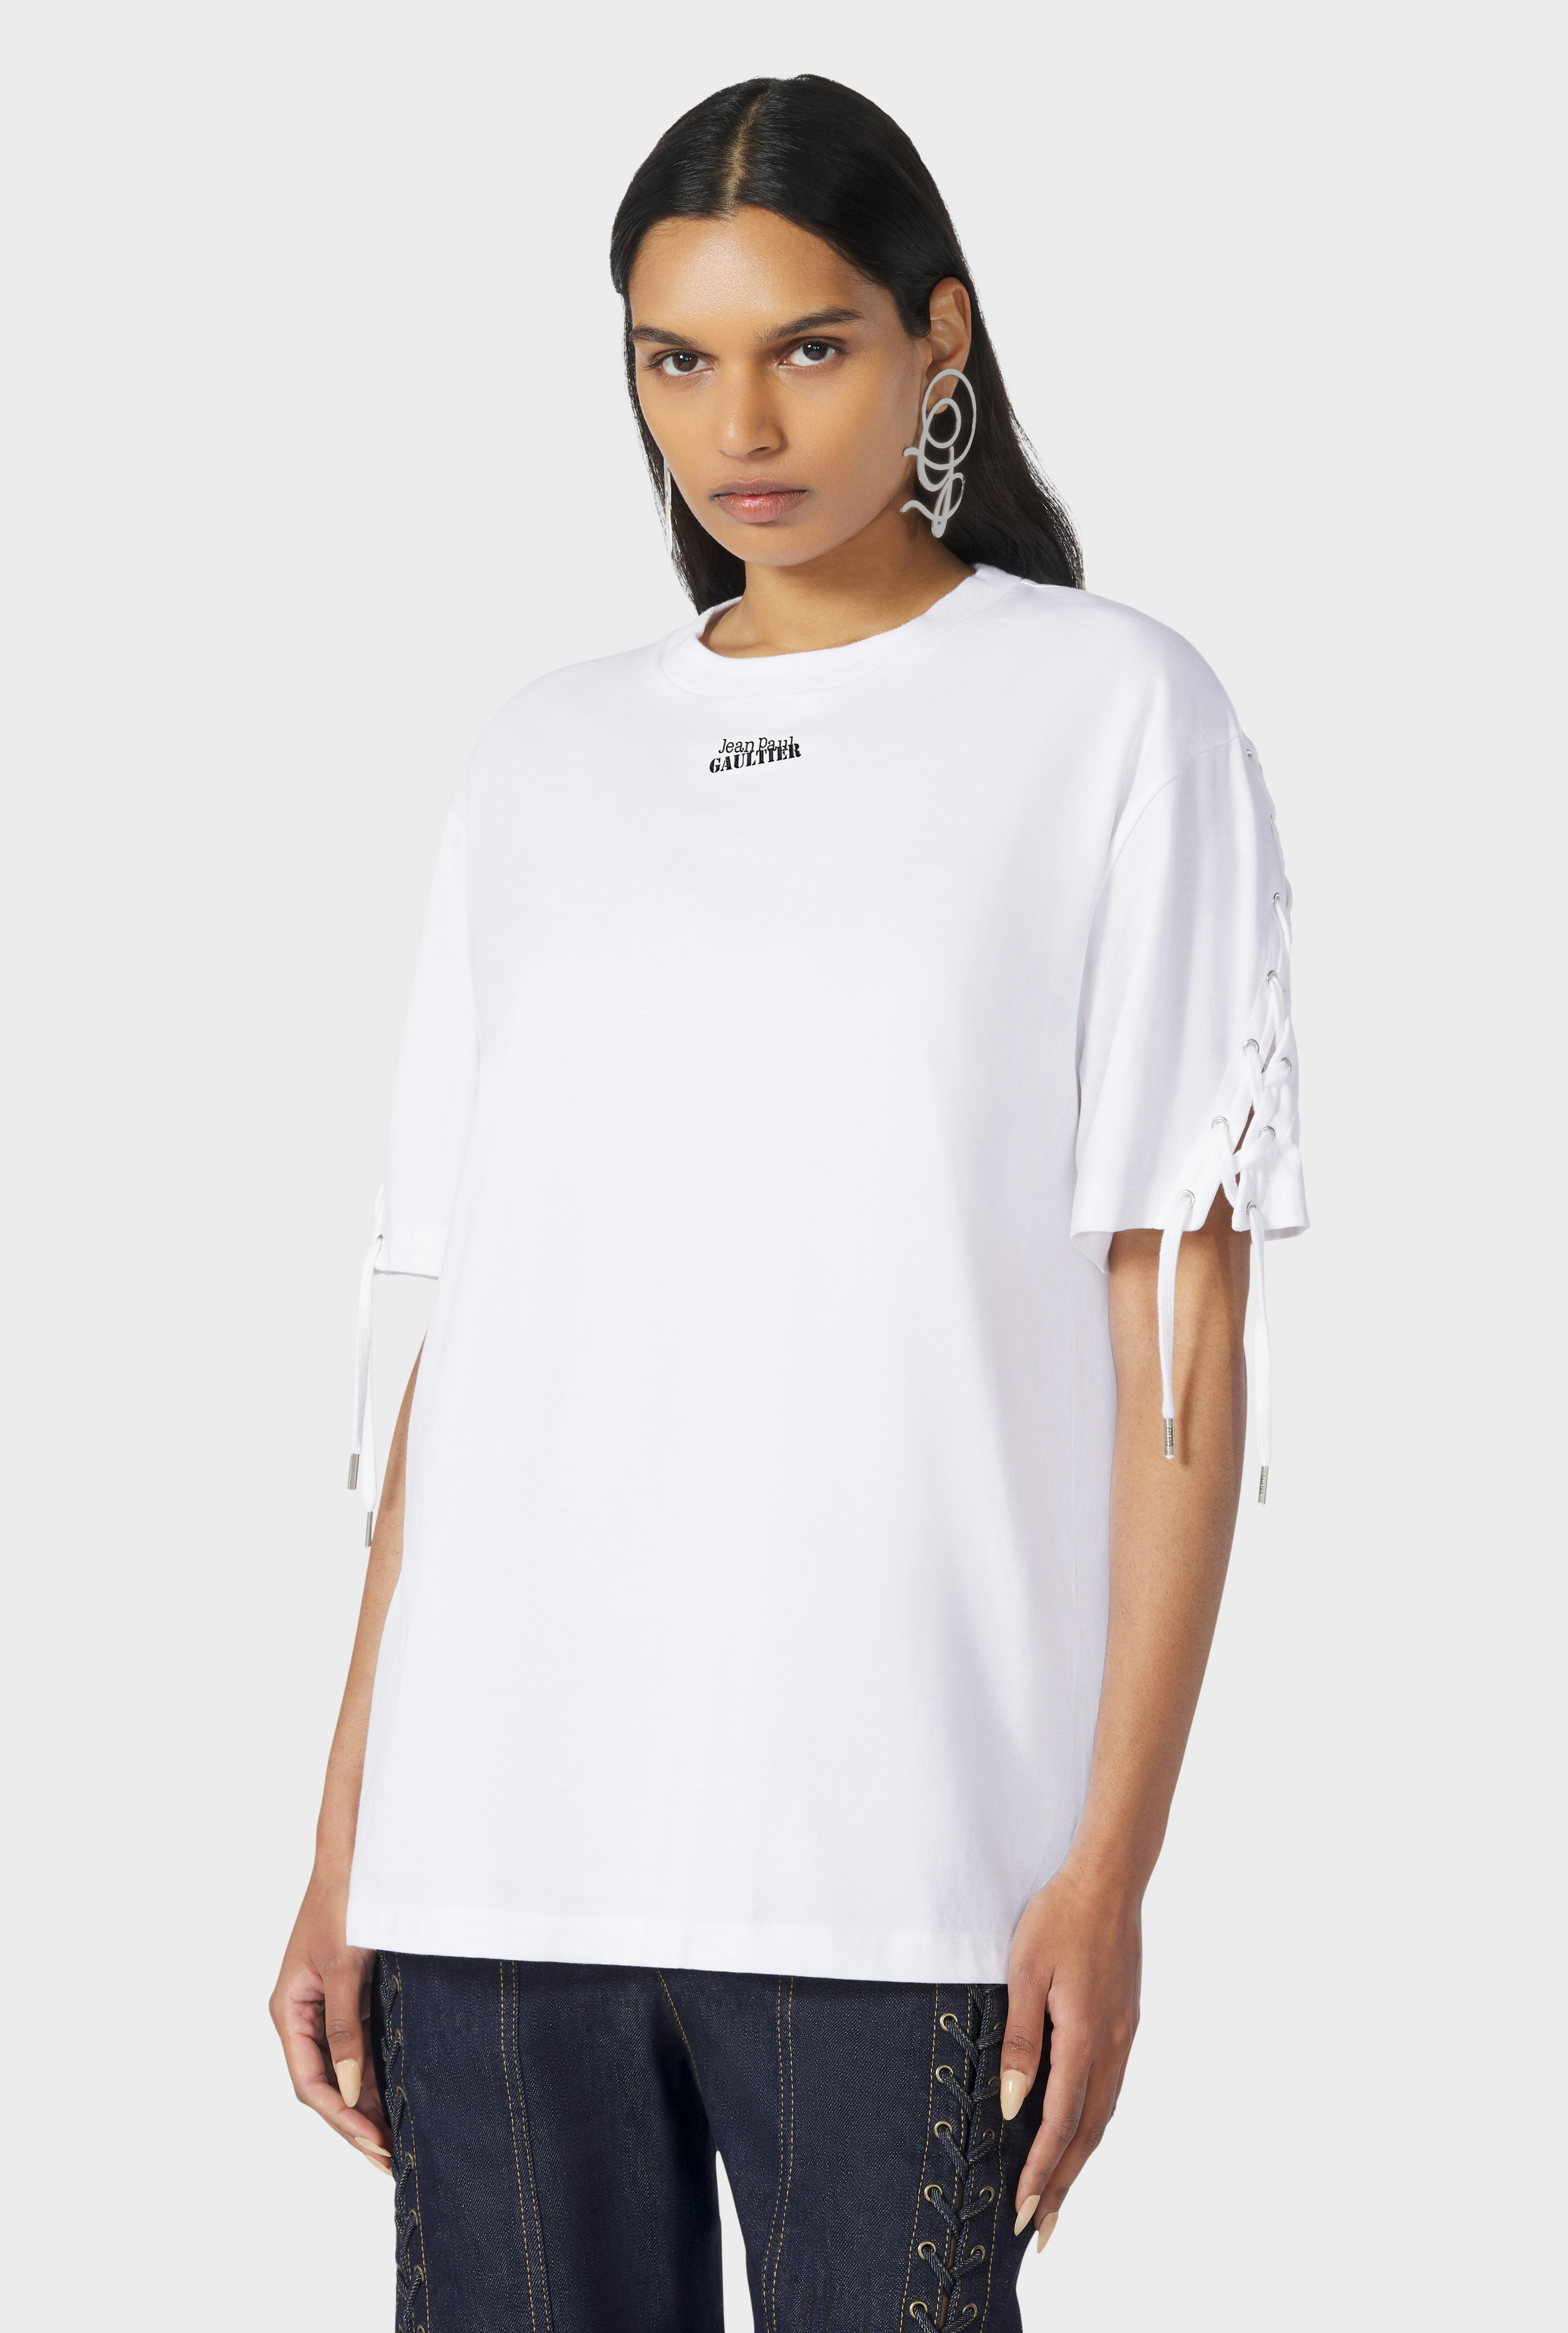 The White Lace-Up JPG T-Shirt